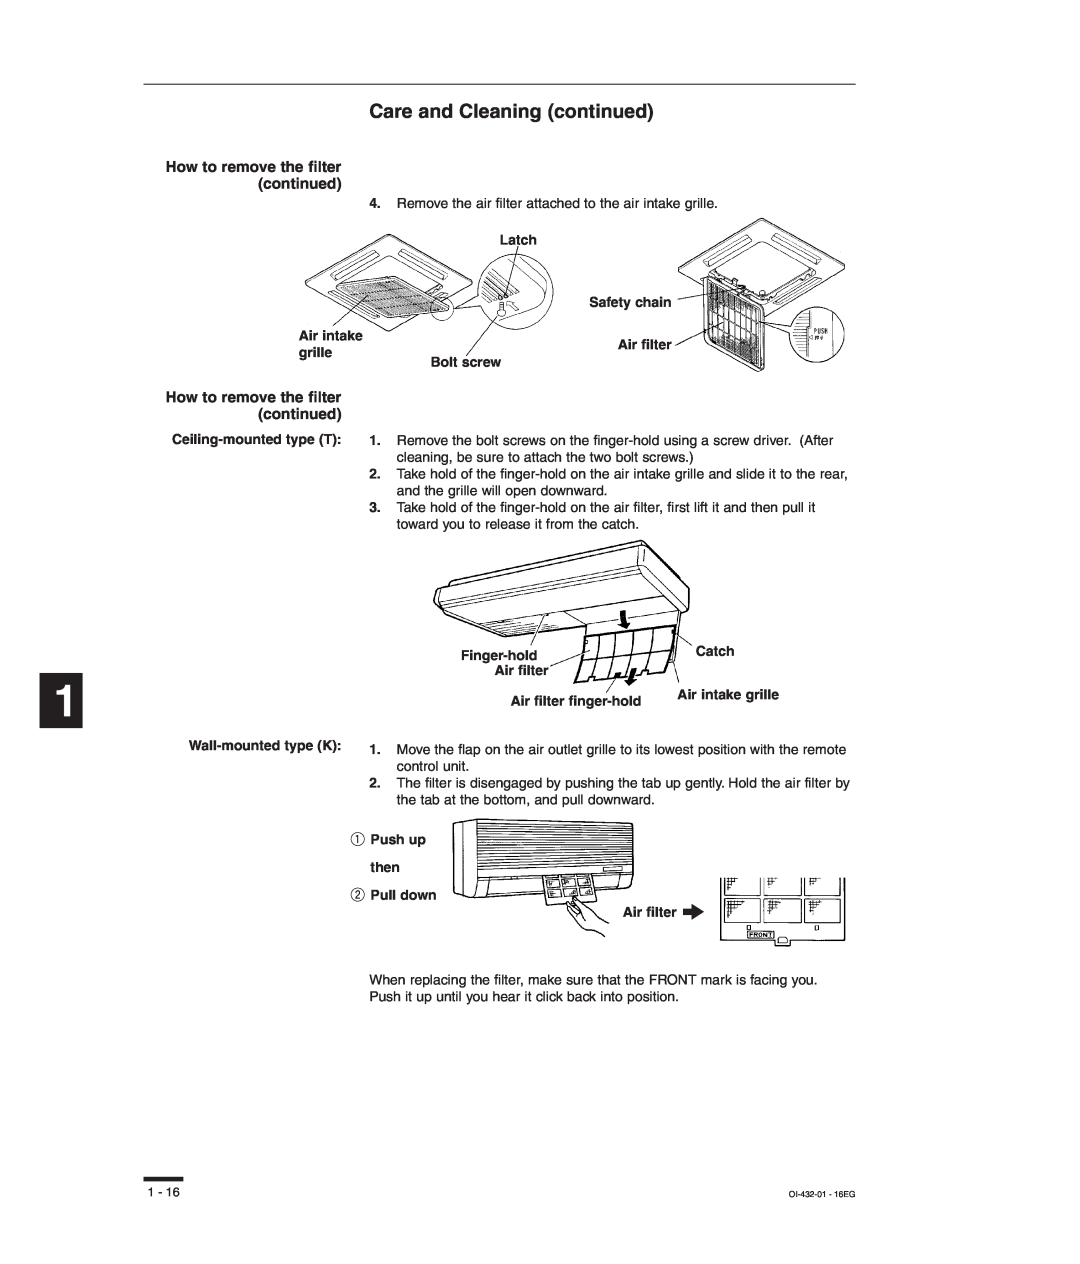 Sanyo RCS-SH80UG, TM-SH80UG, SHA-KC64UG, RCS-SH80UA instruction manual Care and Cleaning continued 